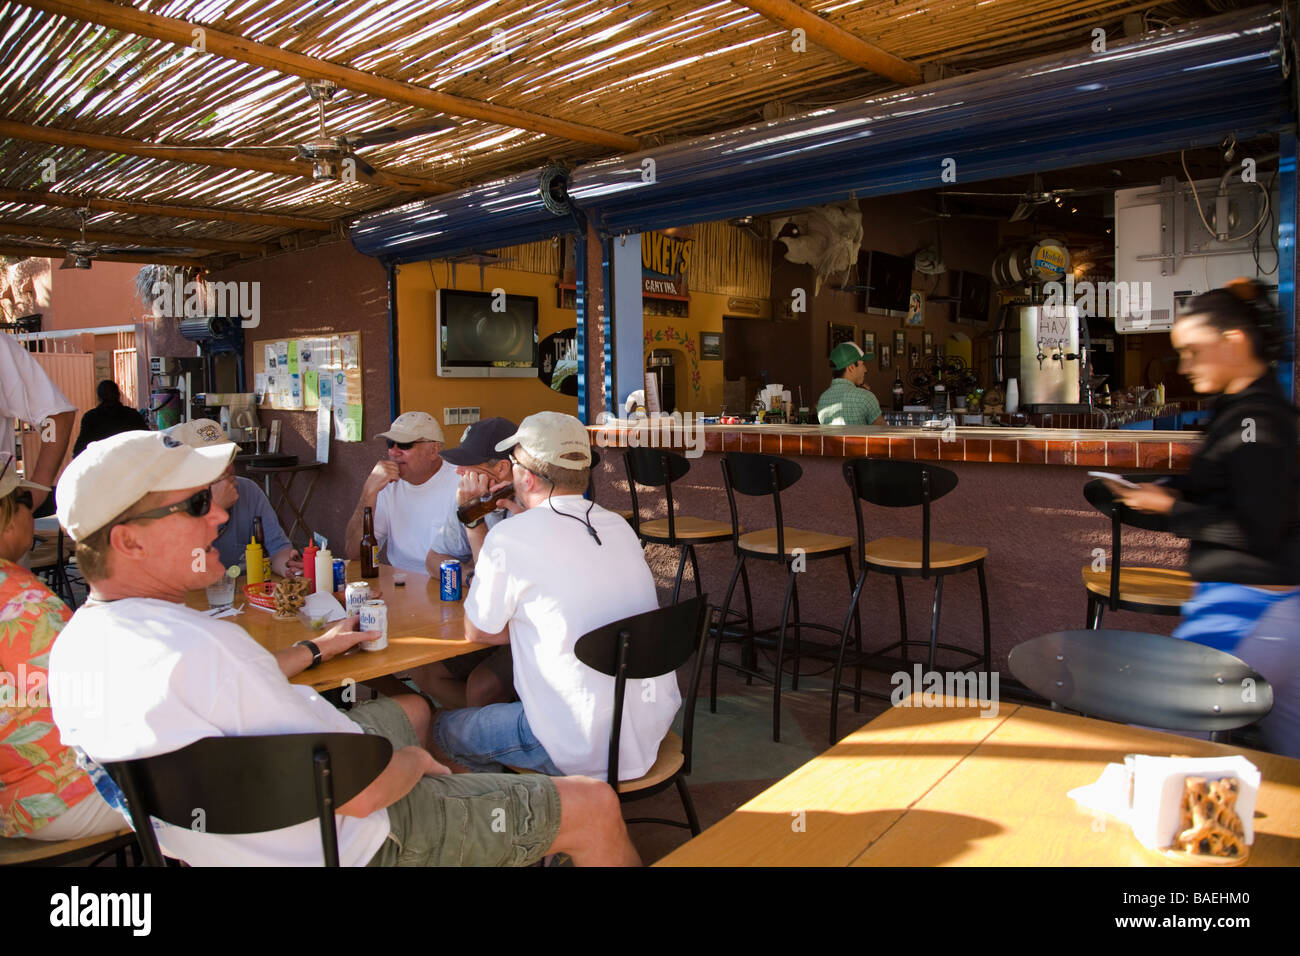 MEXICO Los Barriles American men wearing baseball caps eat at table in Tio Pablos restaurant bartender and waitress Stock Photo